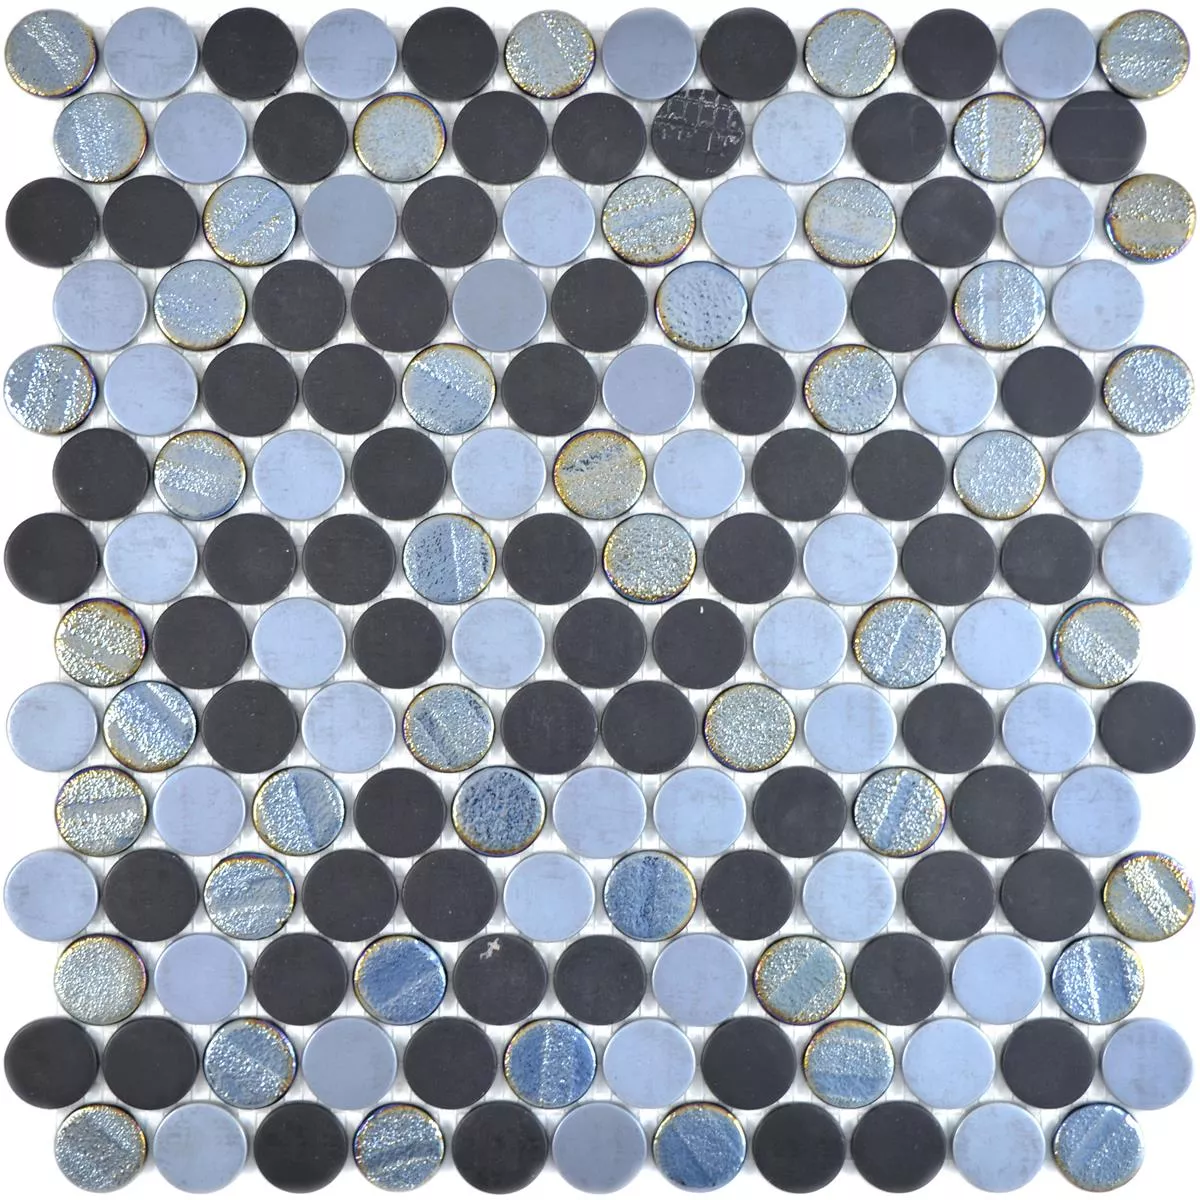 Glass Mosaic Tiles Albany Round Color Mix